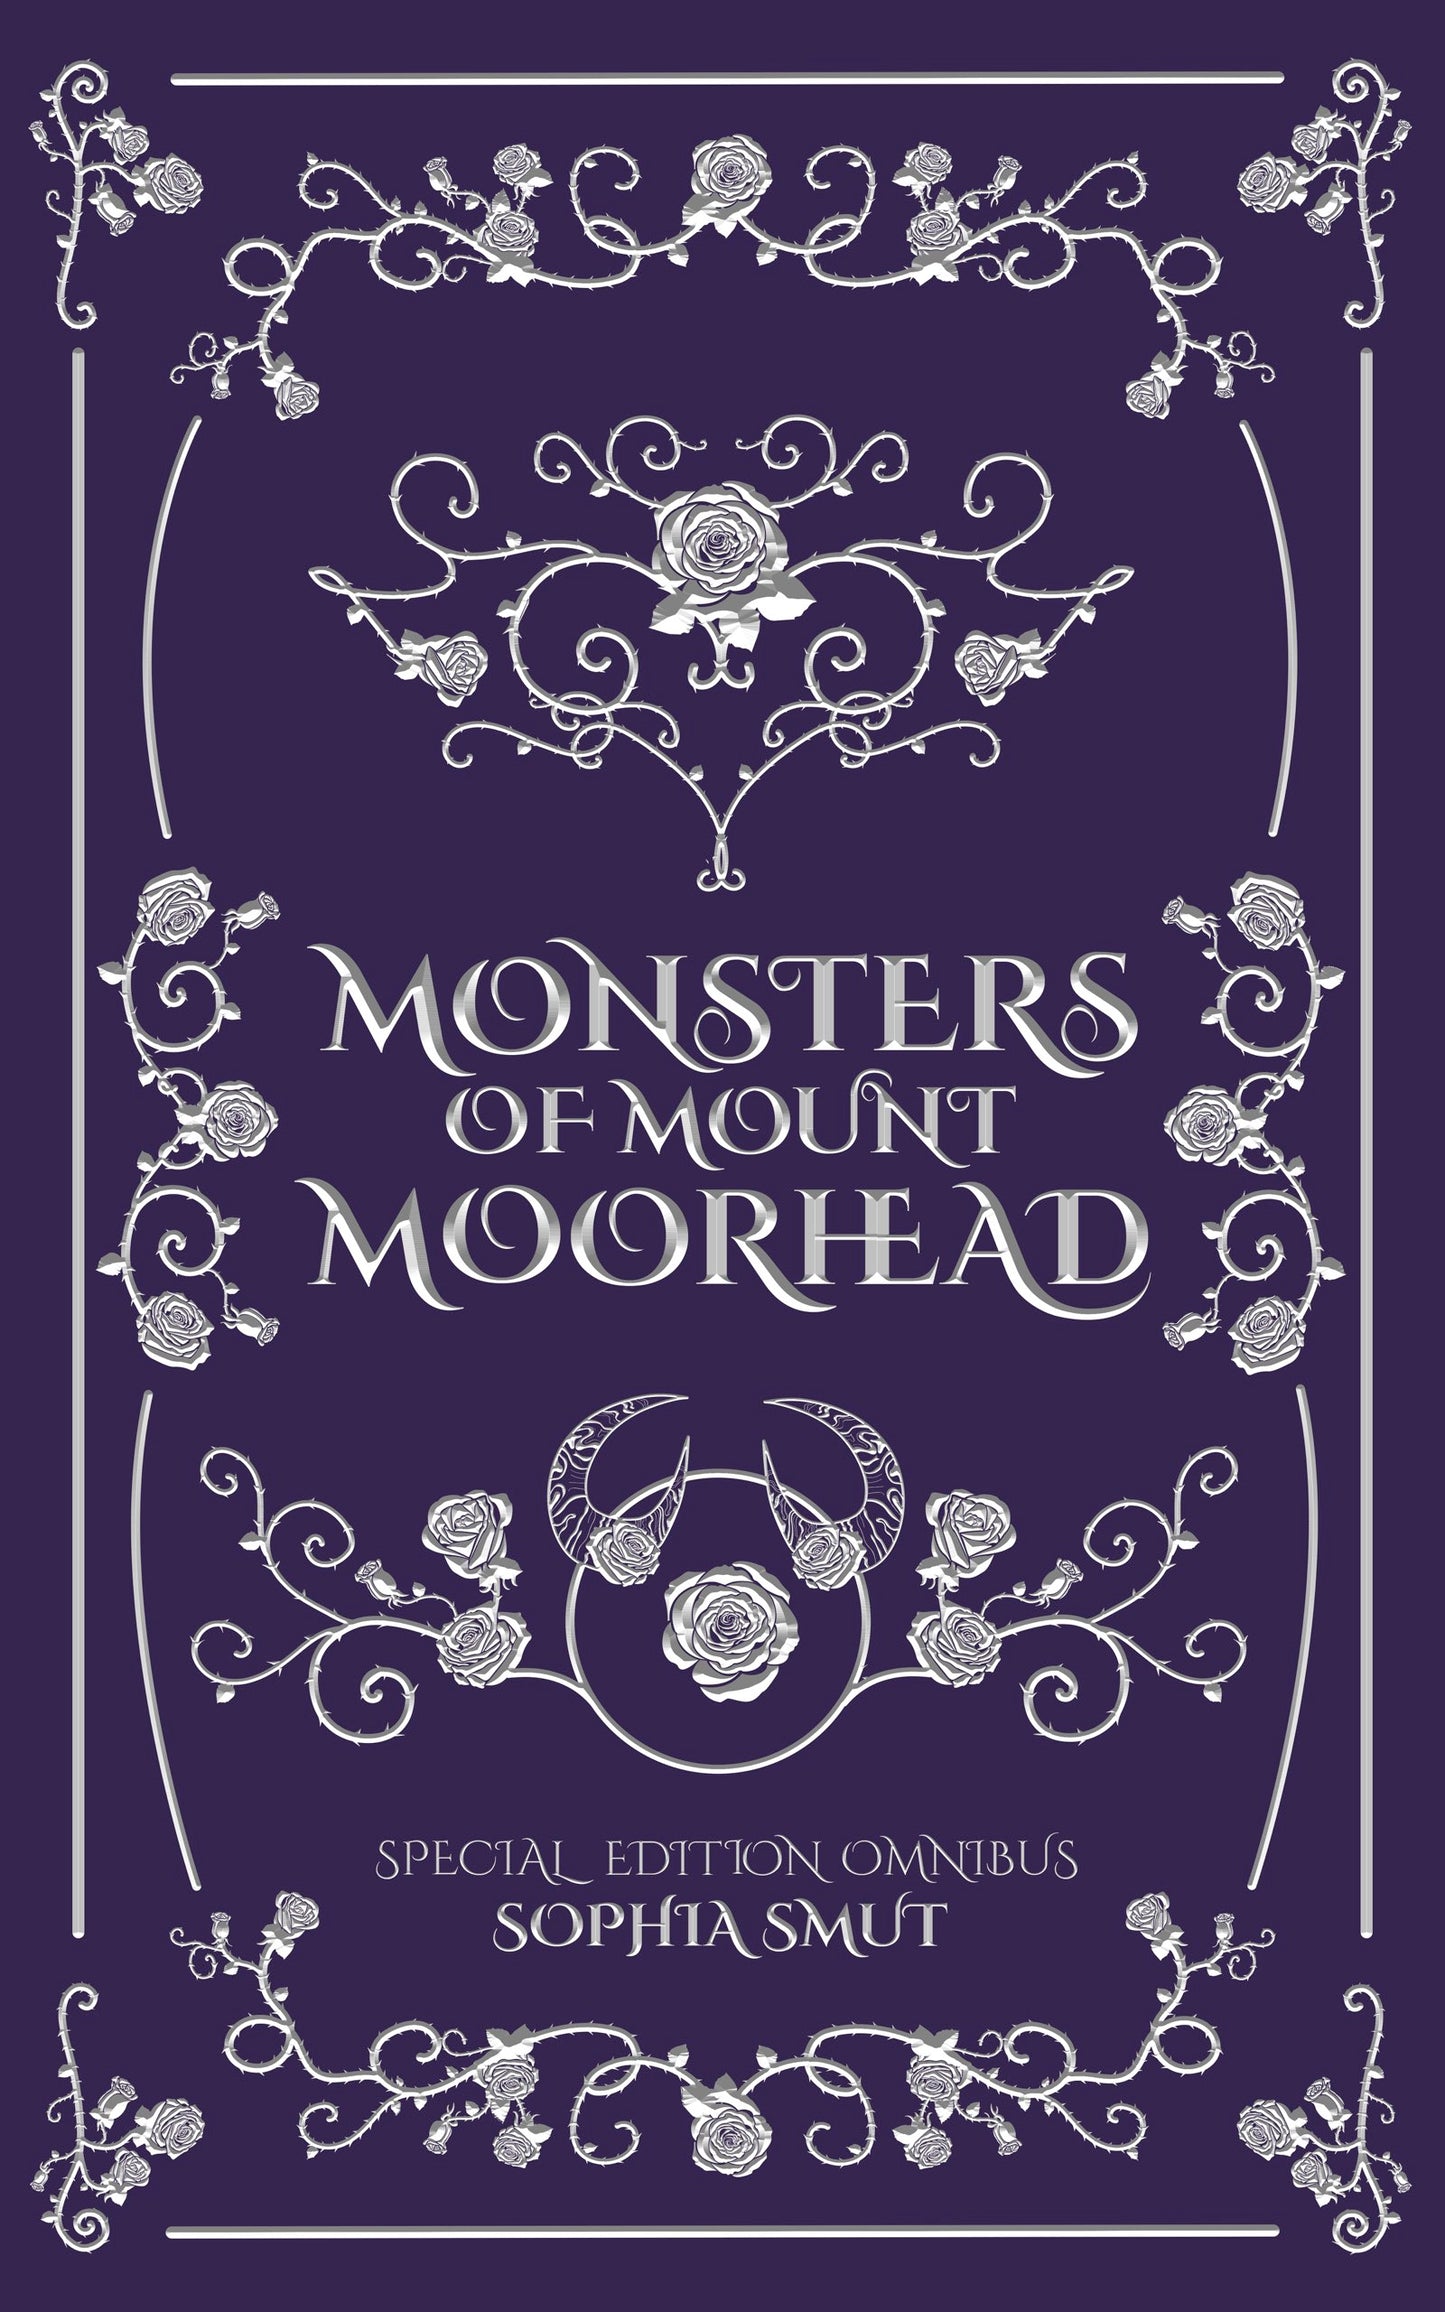 Monsters of Mount Moorhead - Special Edition Omnibus